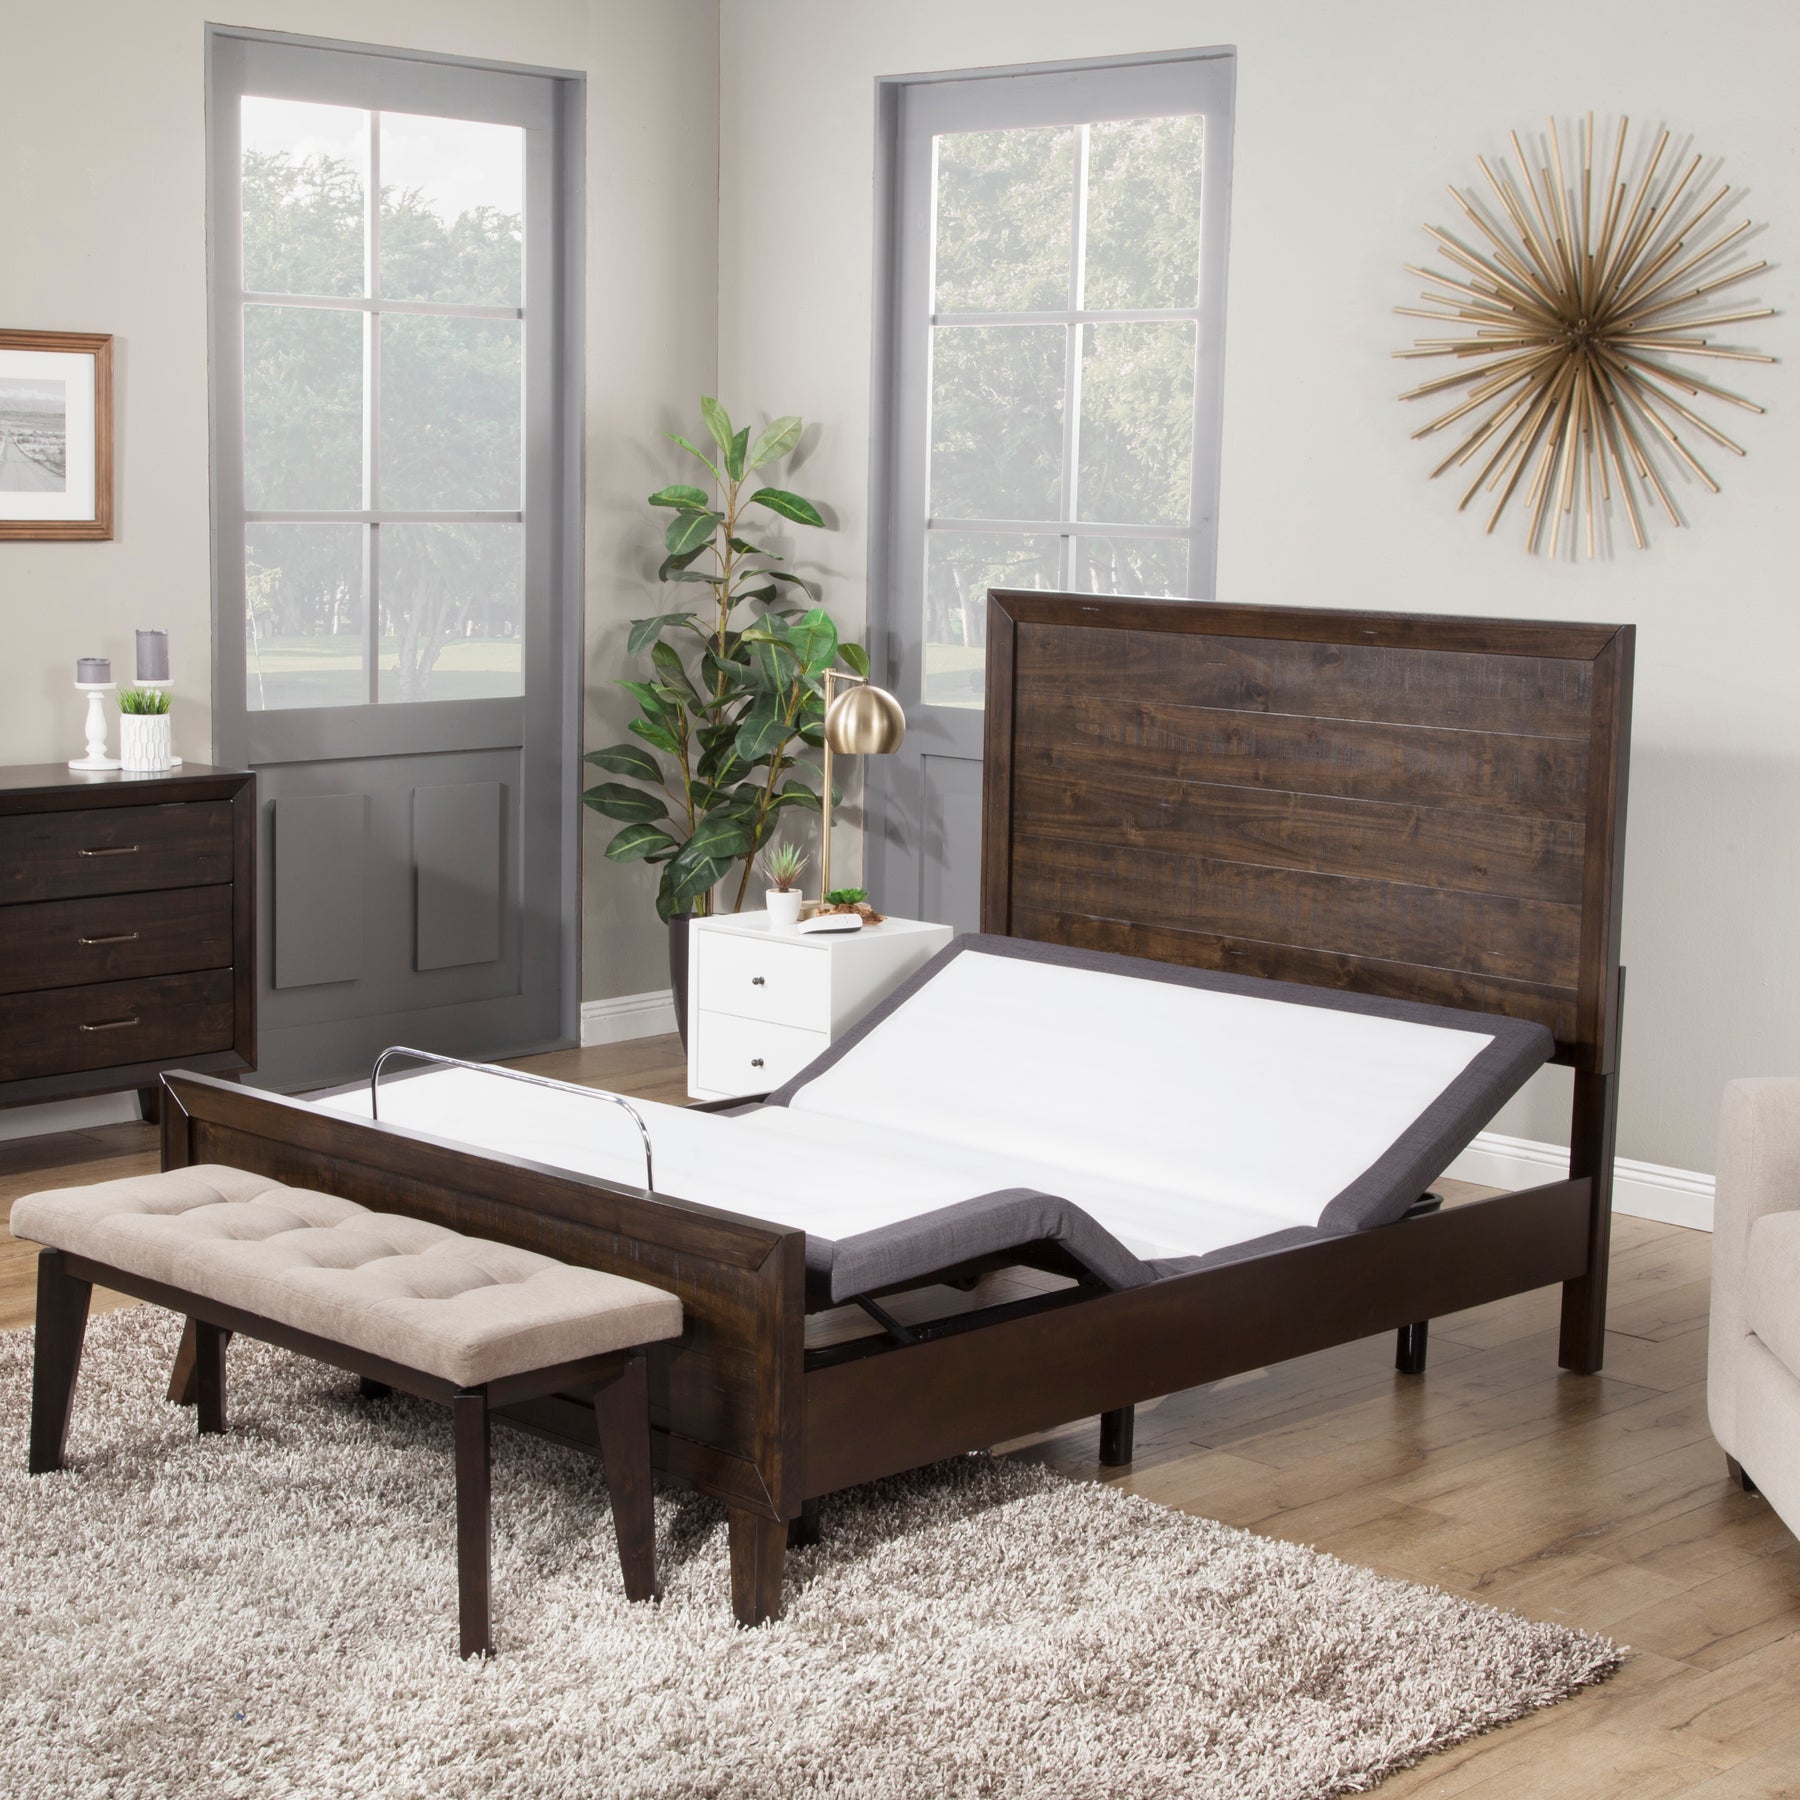 How Does An Adjustable Bed Fit Into a Bed Frame?